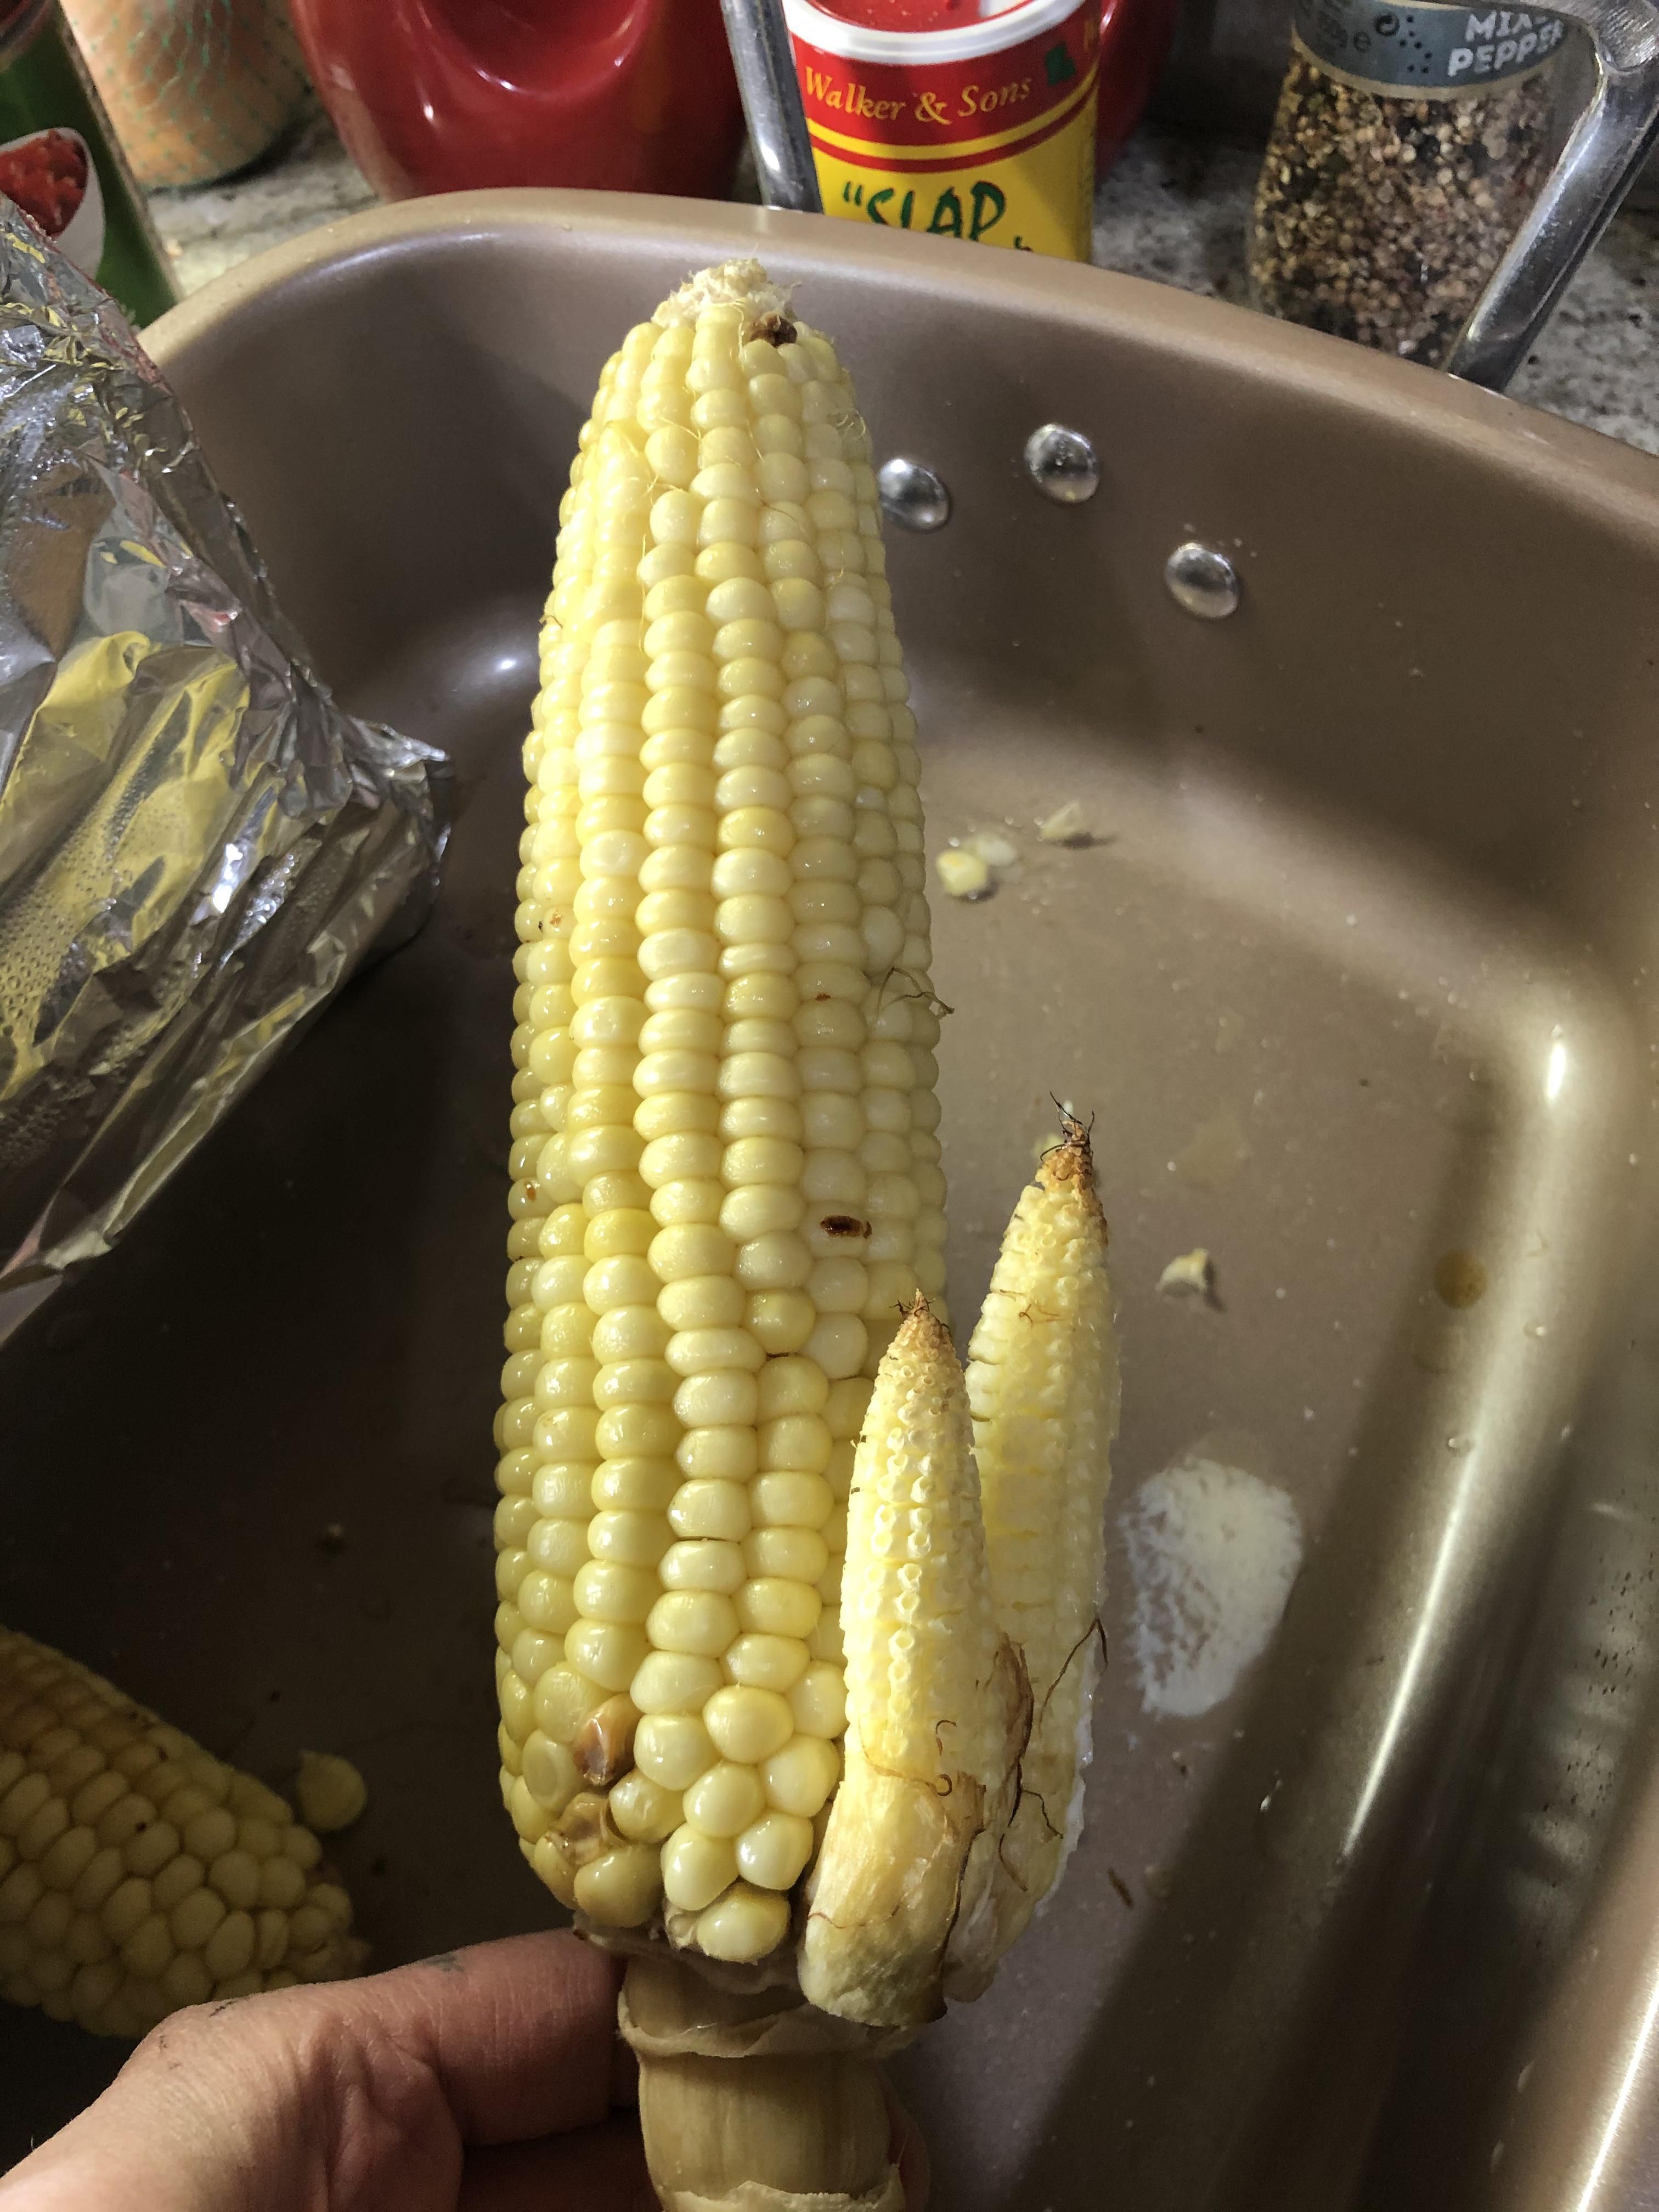 Called my corn a rabbit and the guys didn’t get it